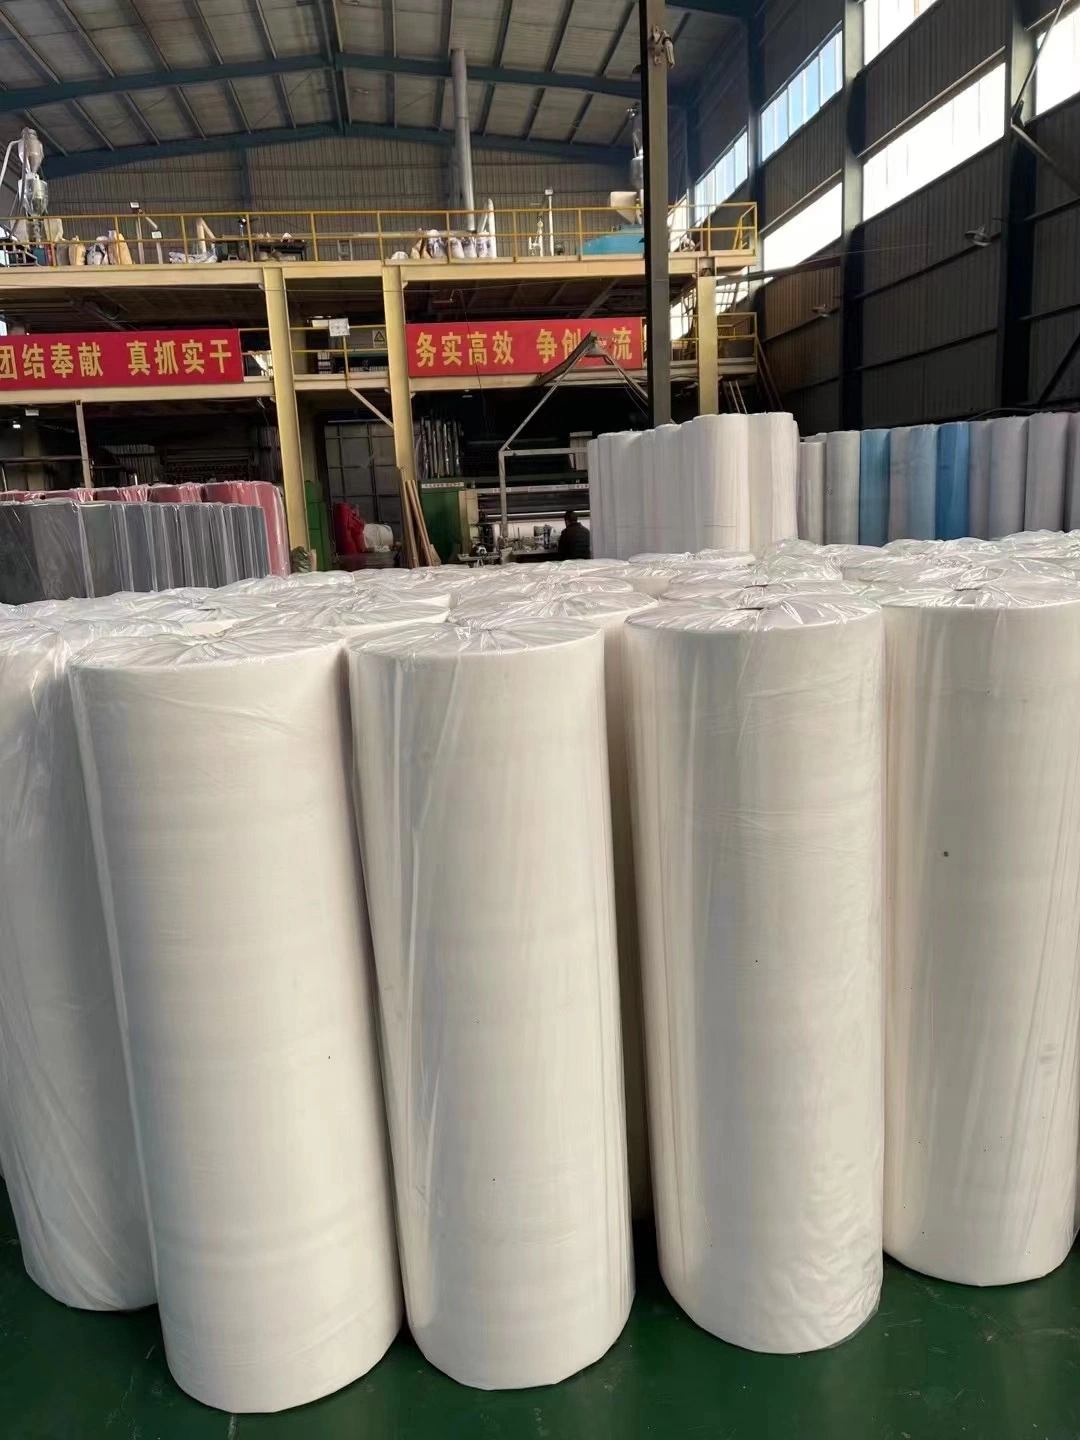 Factory Products About Spunbonded Nonwoven Fabric for Home Textile Ect.